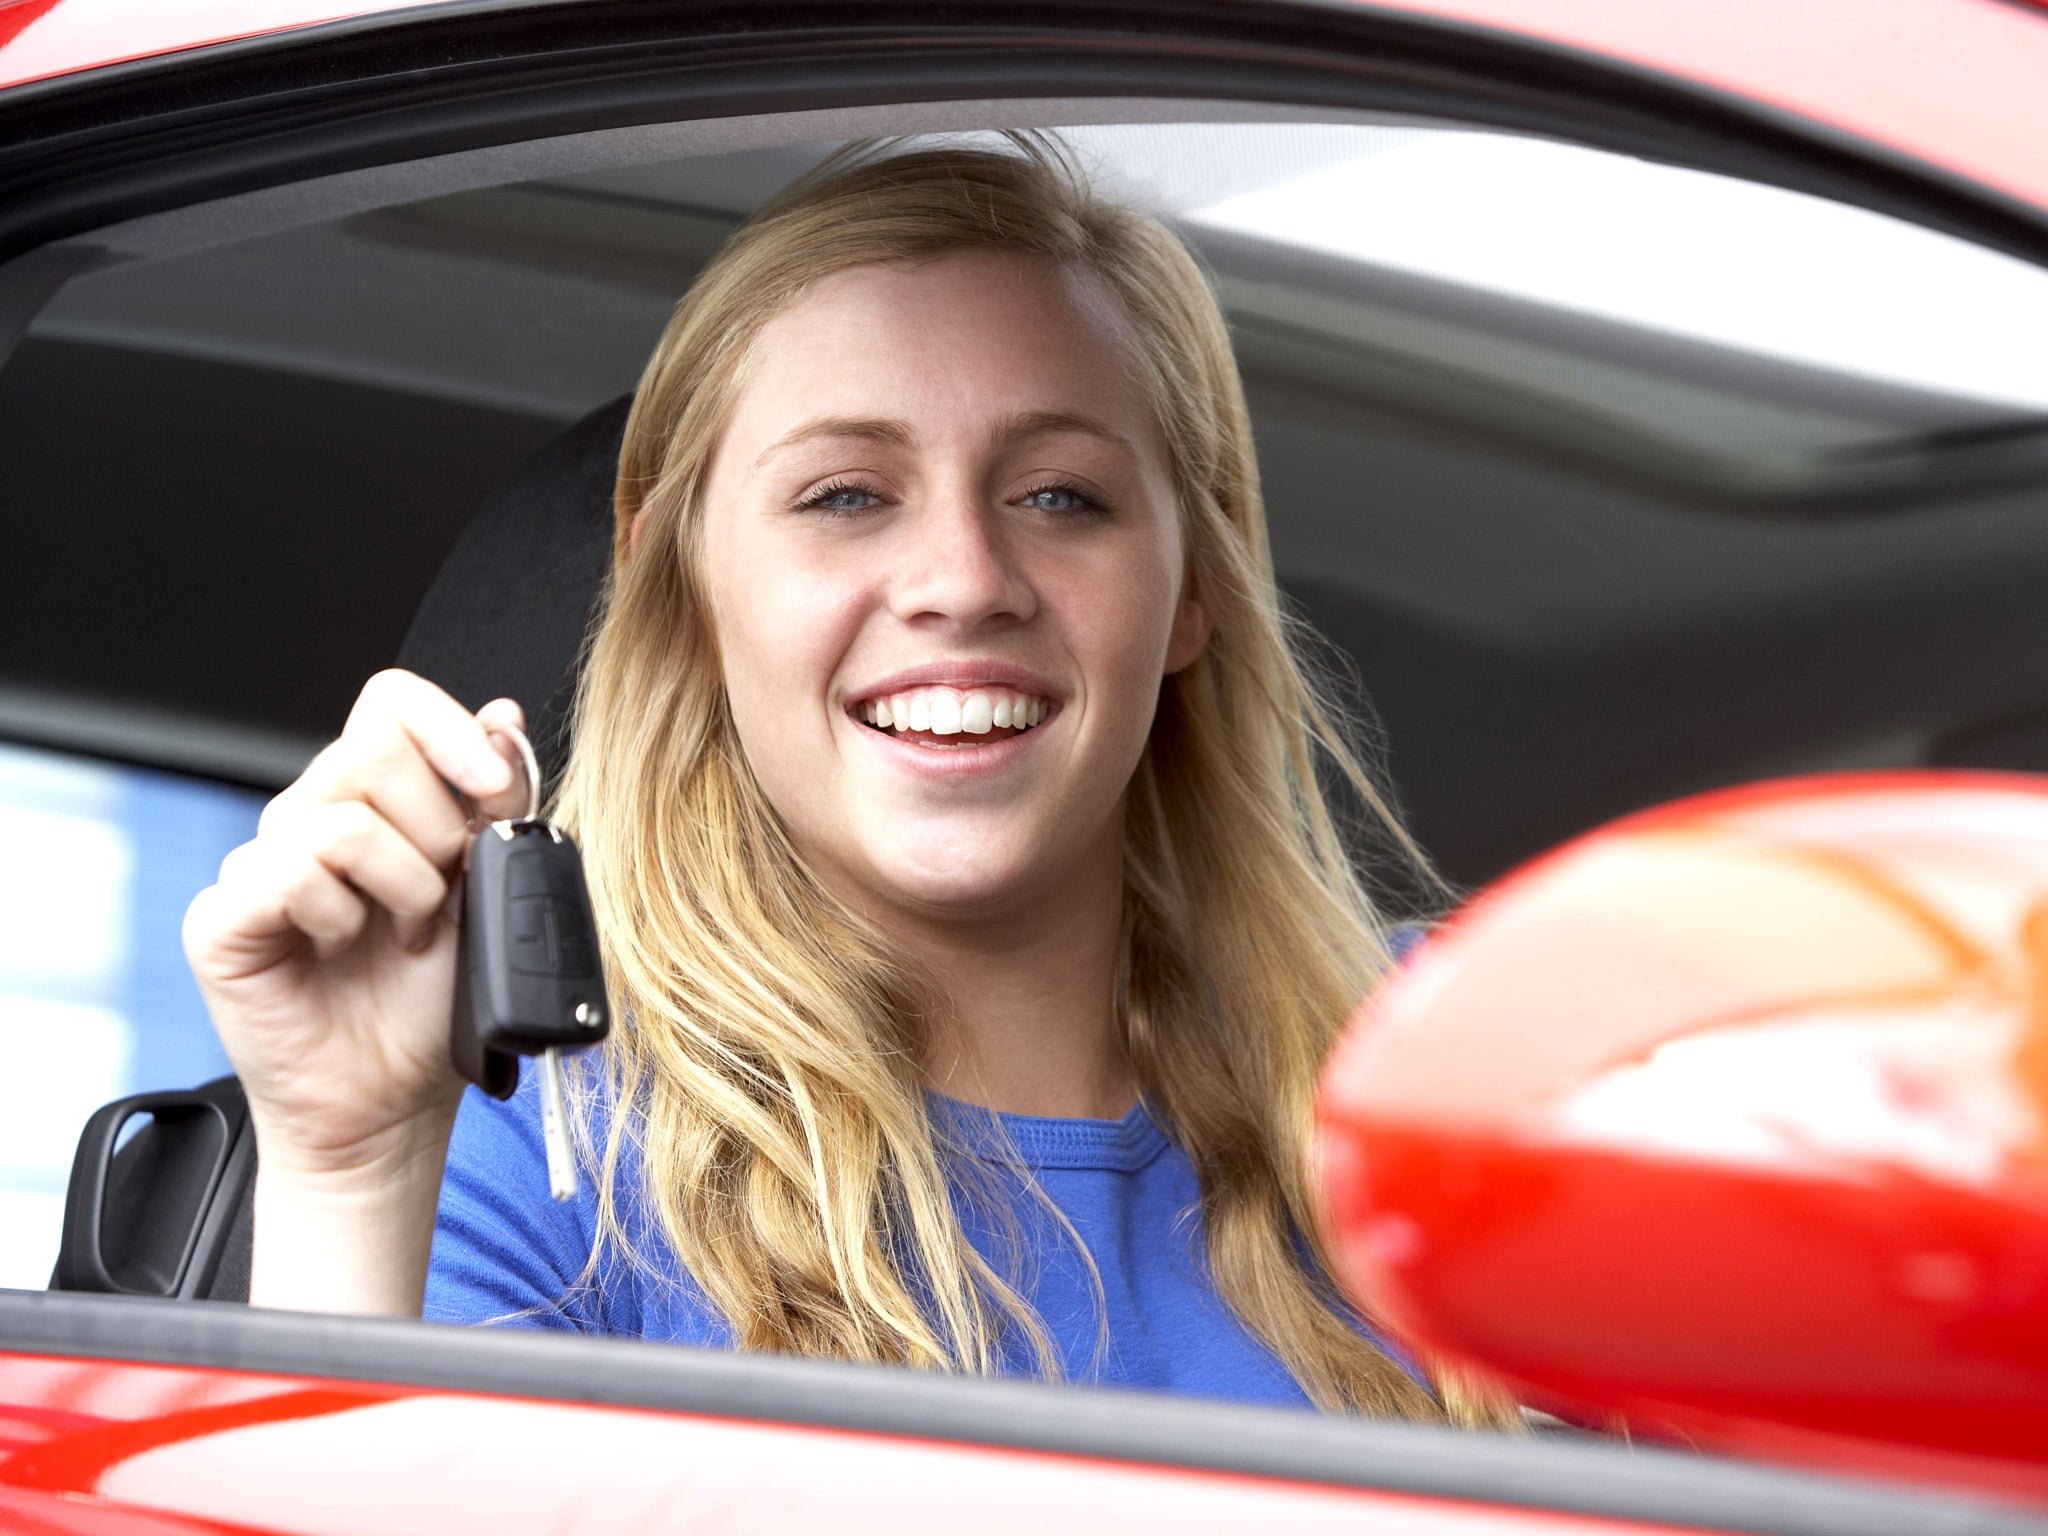 Under the proposals, new drivers under the age of 30 would receive a year-long probationary licence